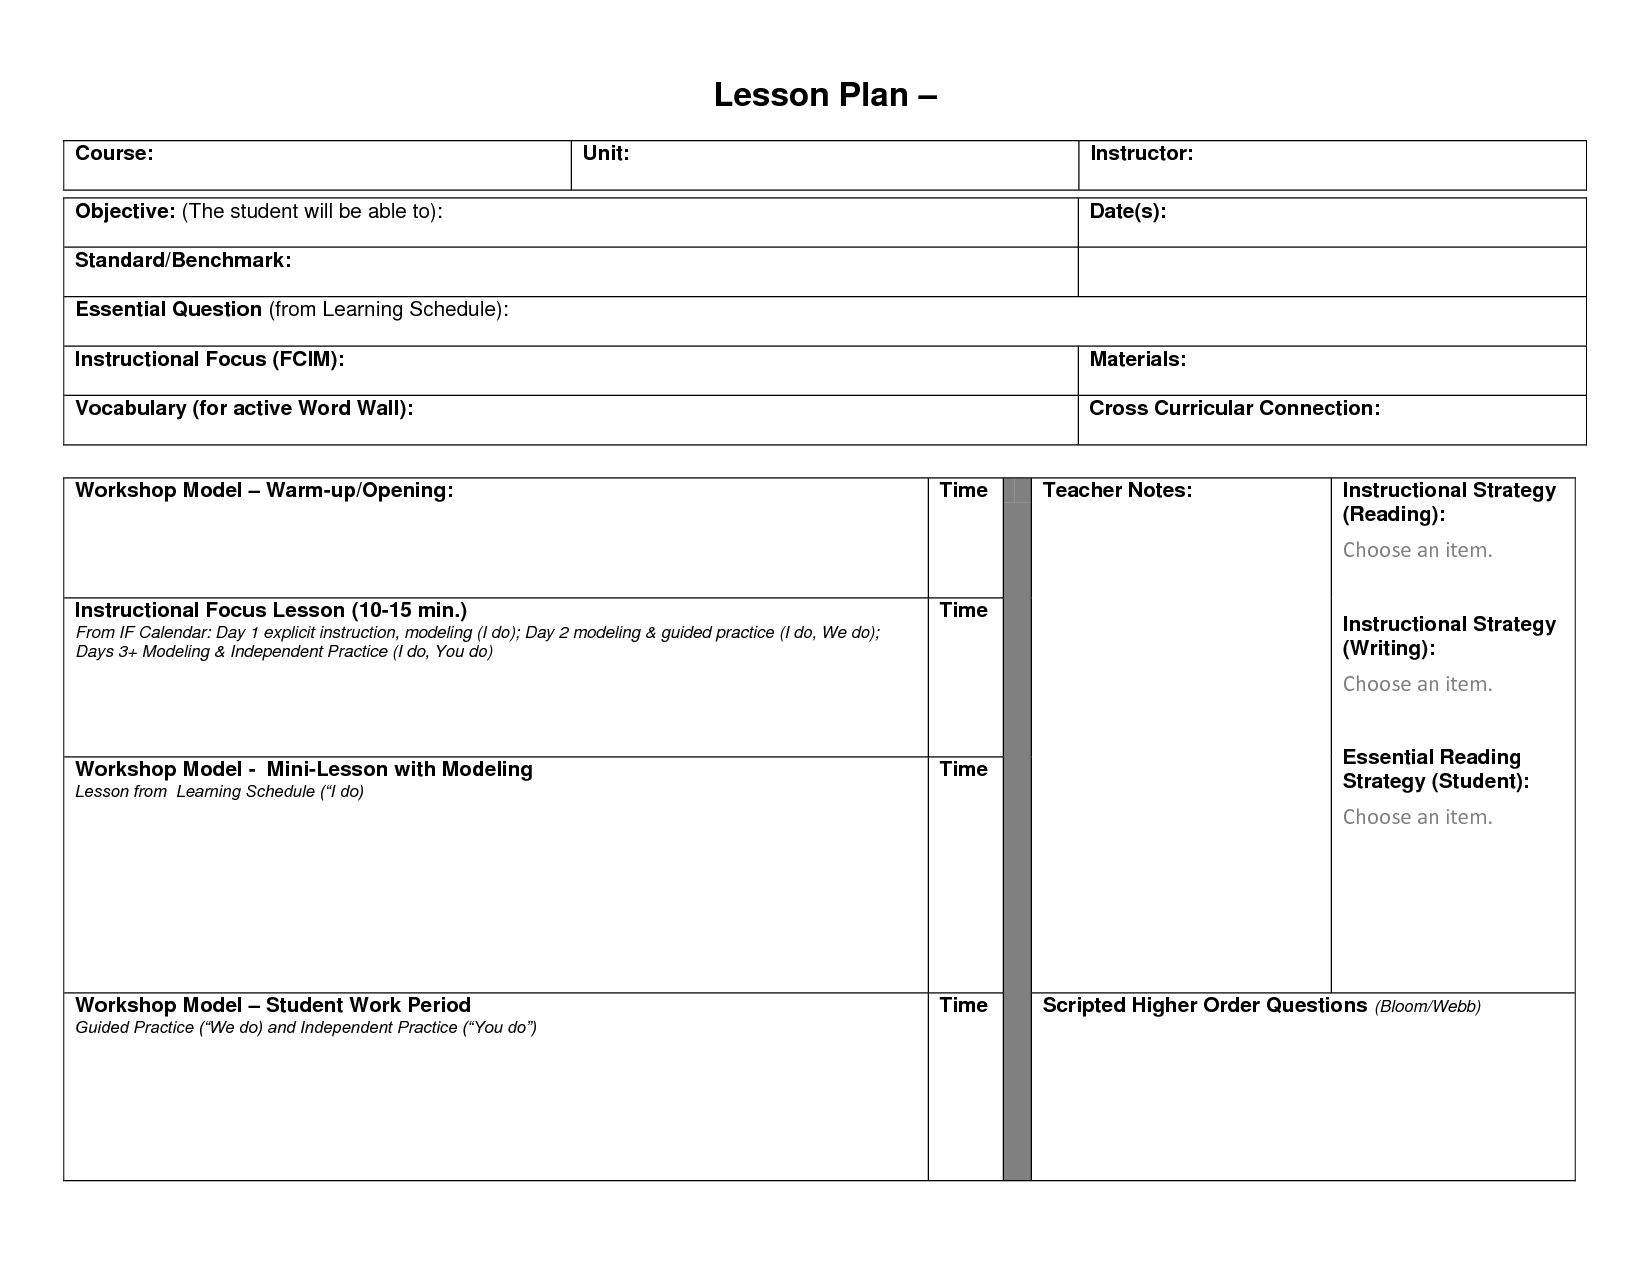 Blank Lesson Plan Format Template | Blank Lesson Template With Blank Unit Lesson Plan Template